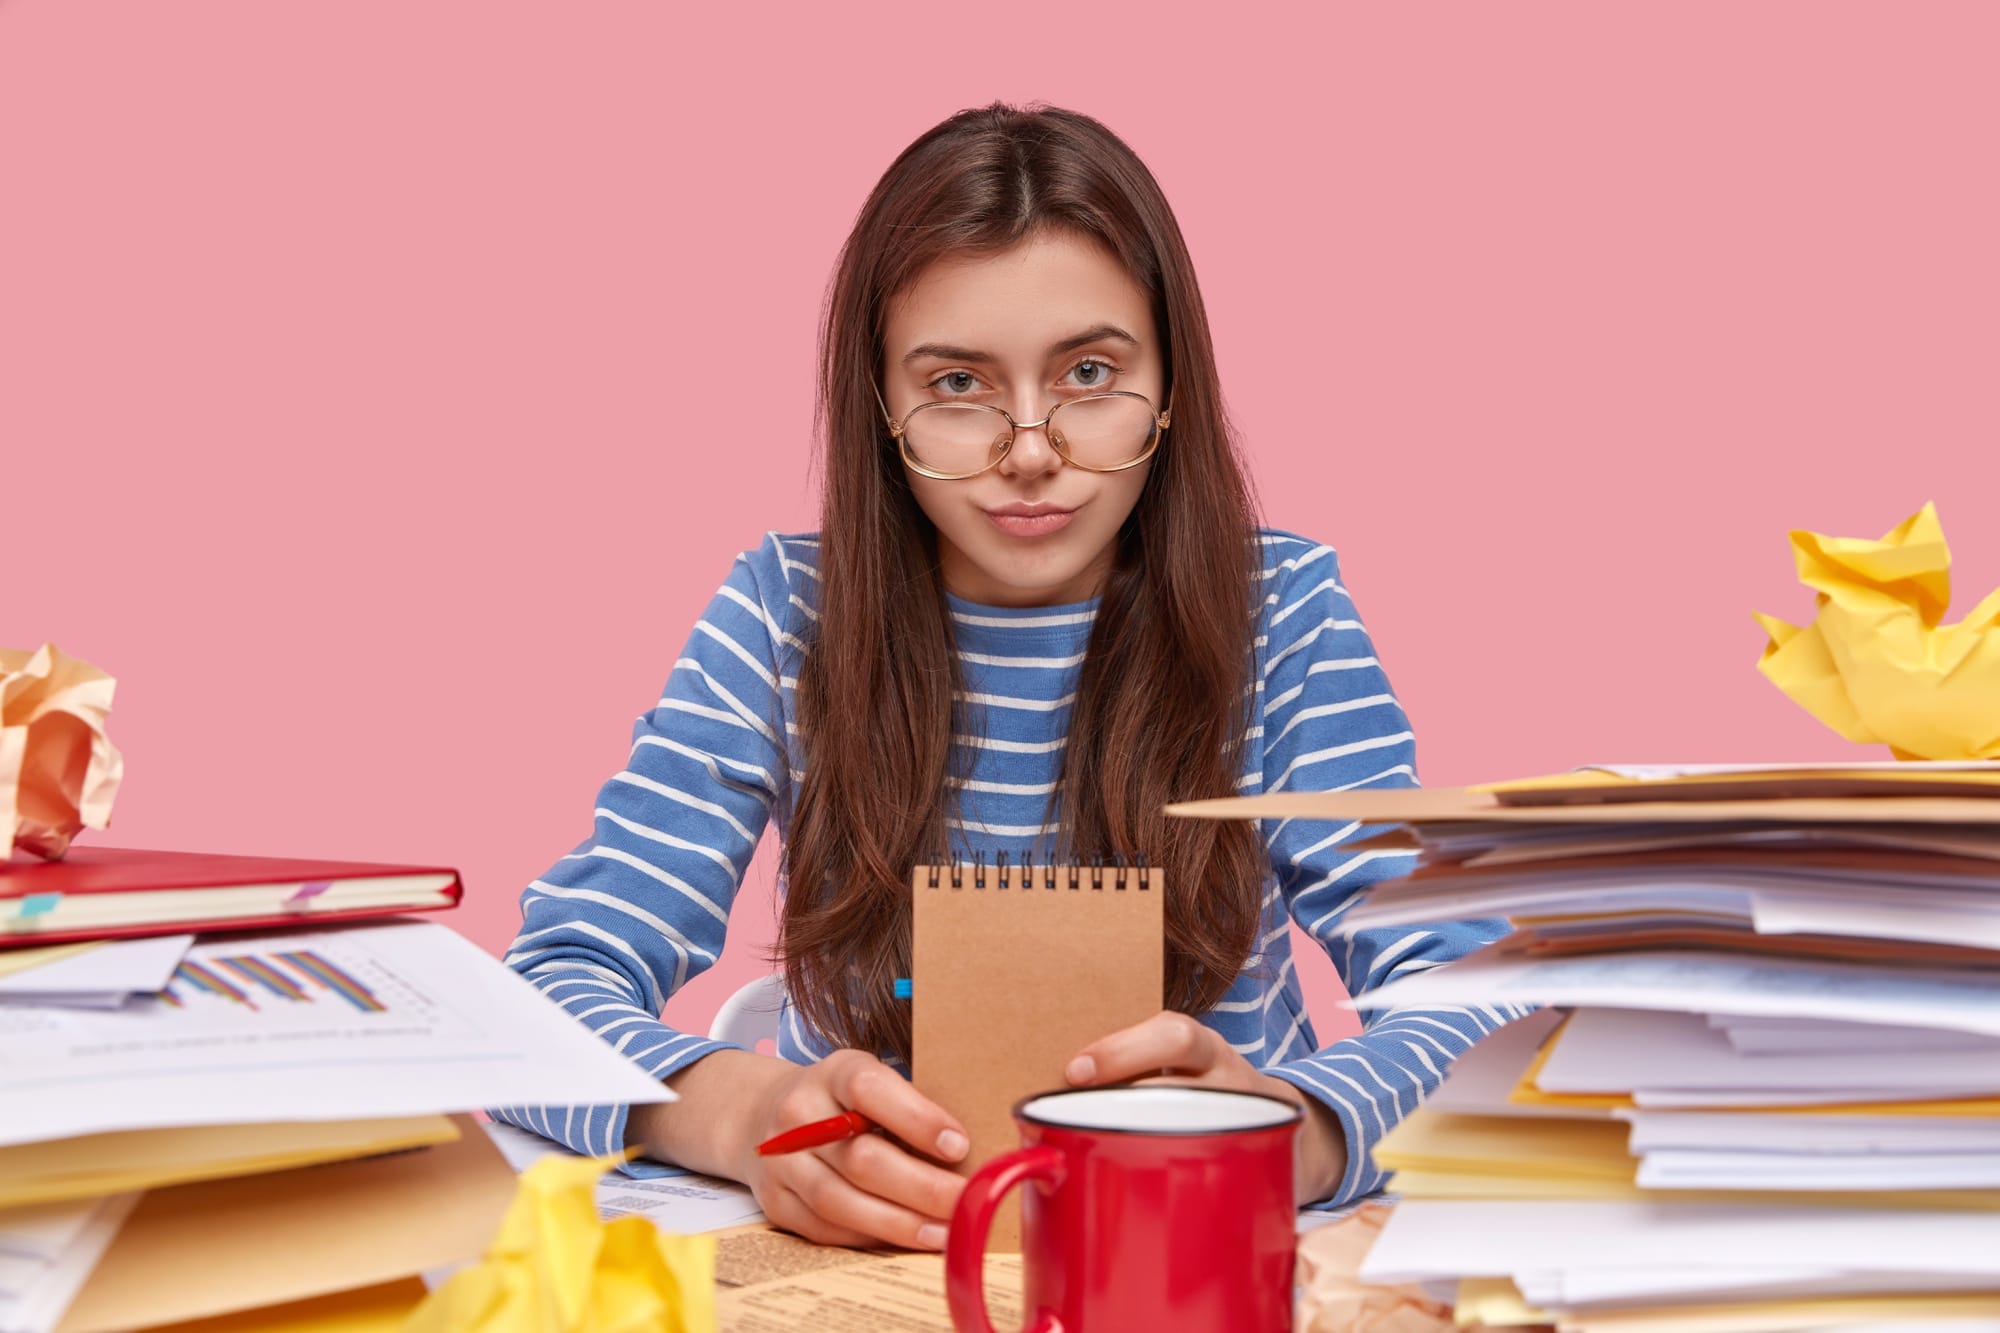 Female Student Overwhelmed With Books and Studies During Exams